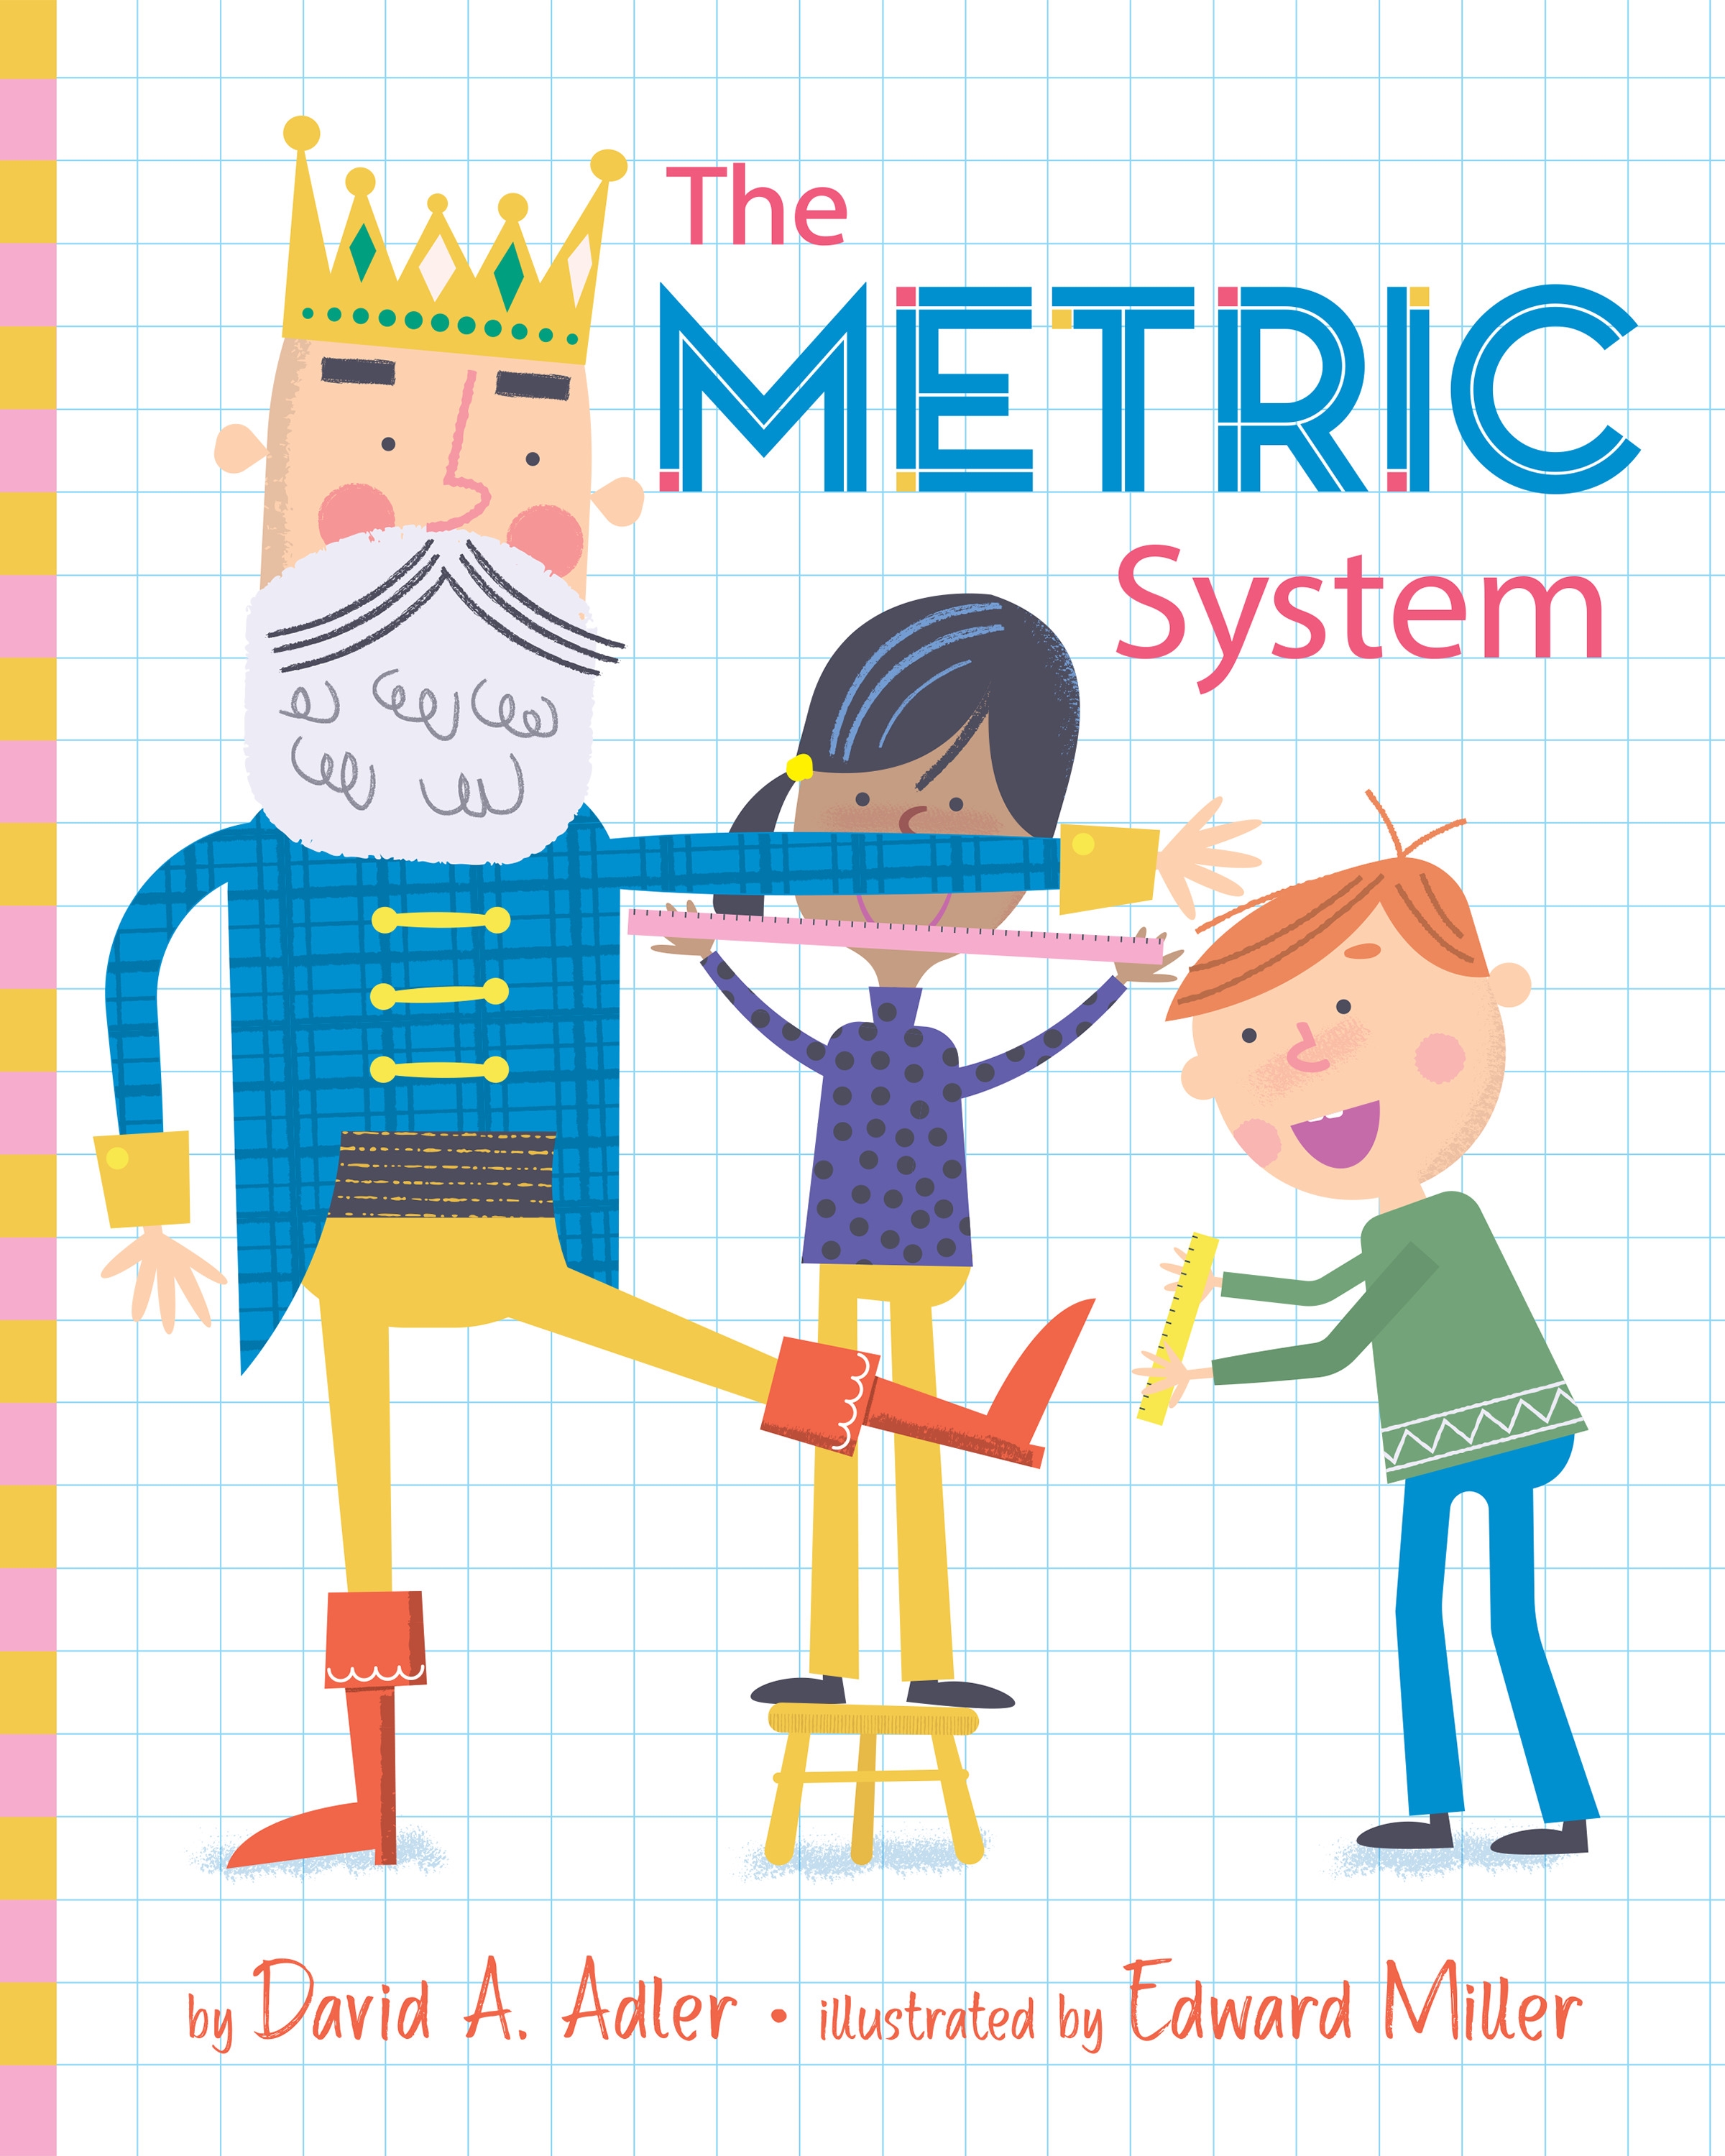 the-metric-system-by-david-a-adler-penguin-books-new-zealand